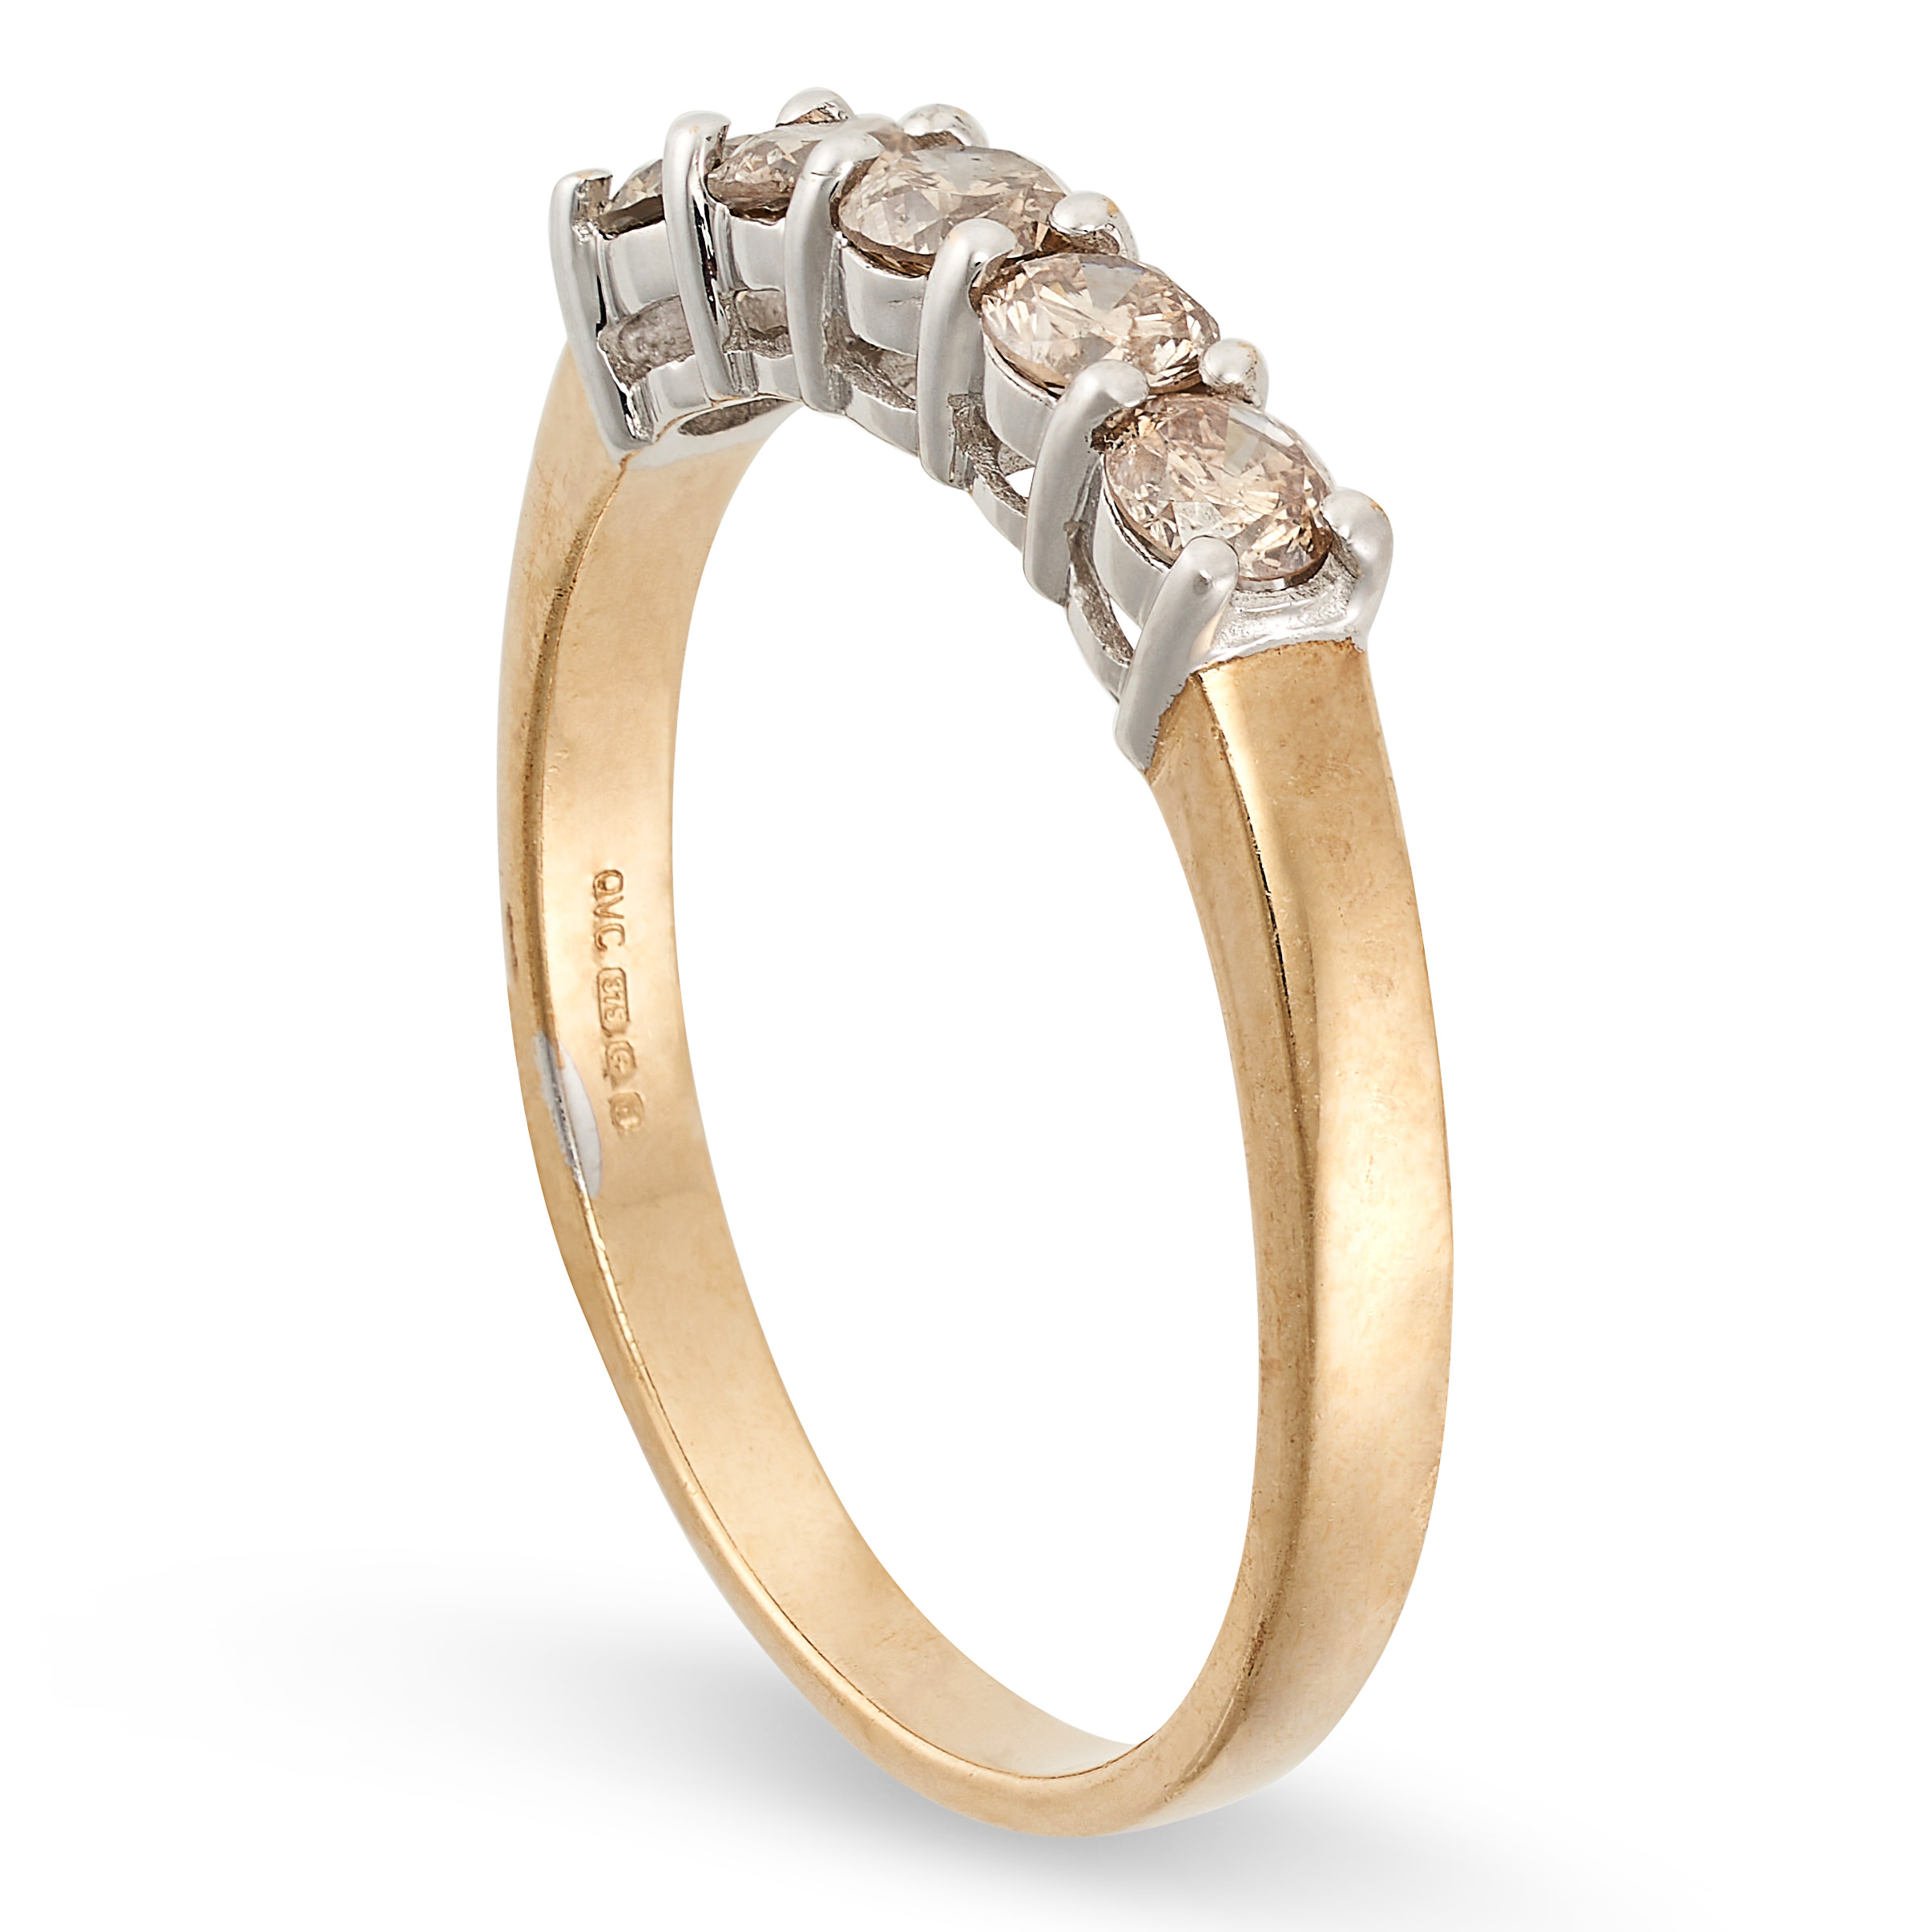 A DIAMOND FIVE STONE RING in 9ct yellow gold, set with five round brilliant cut diamonds all - Image 2 of 2